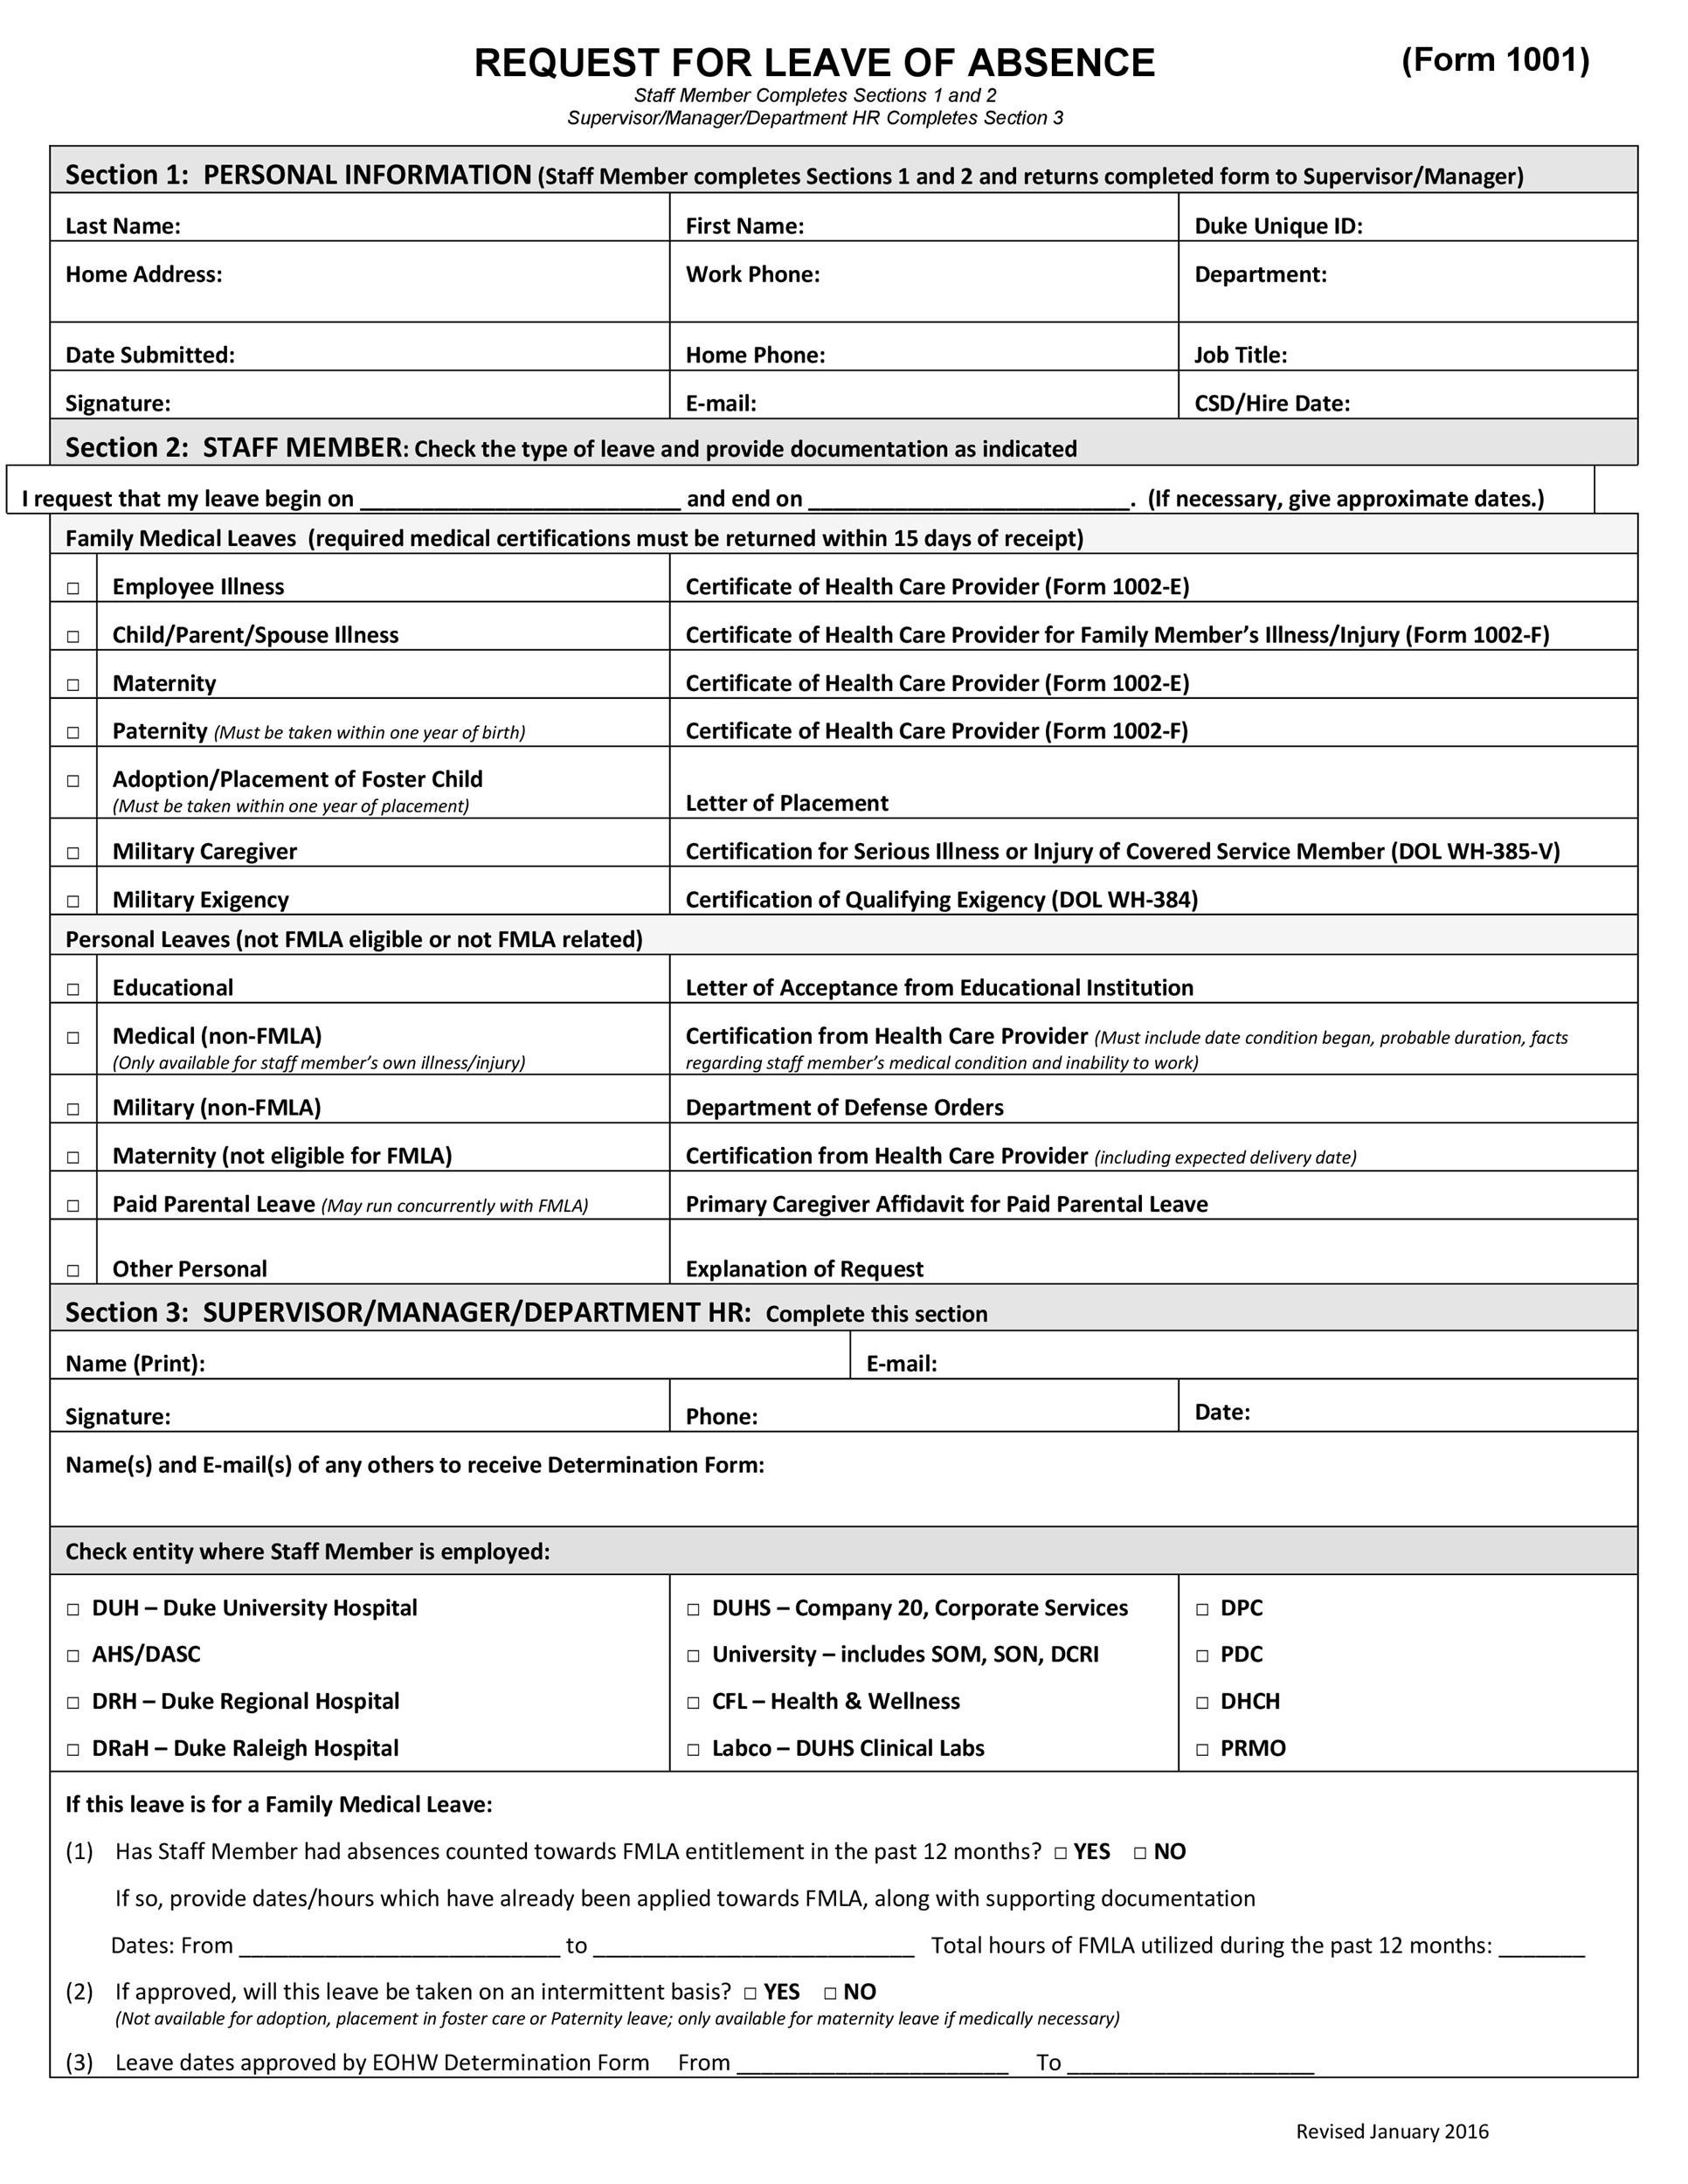 free-printable-leave-of-absence-form-printable-forms-free-online